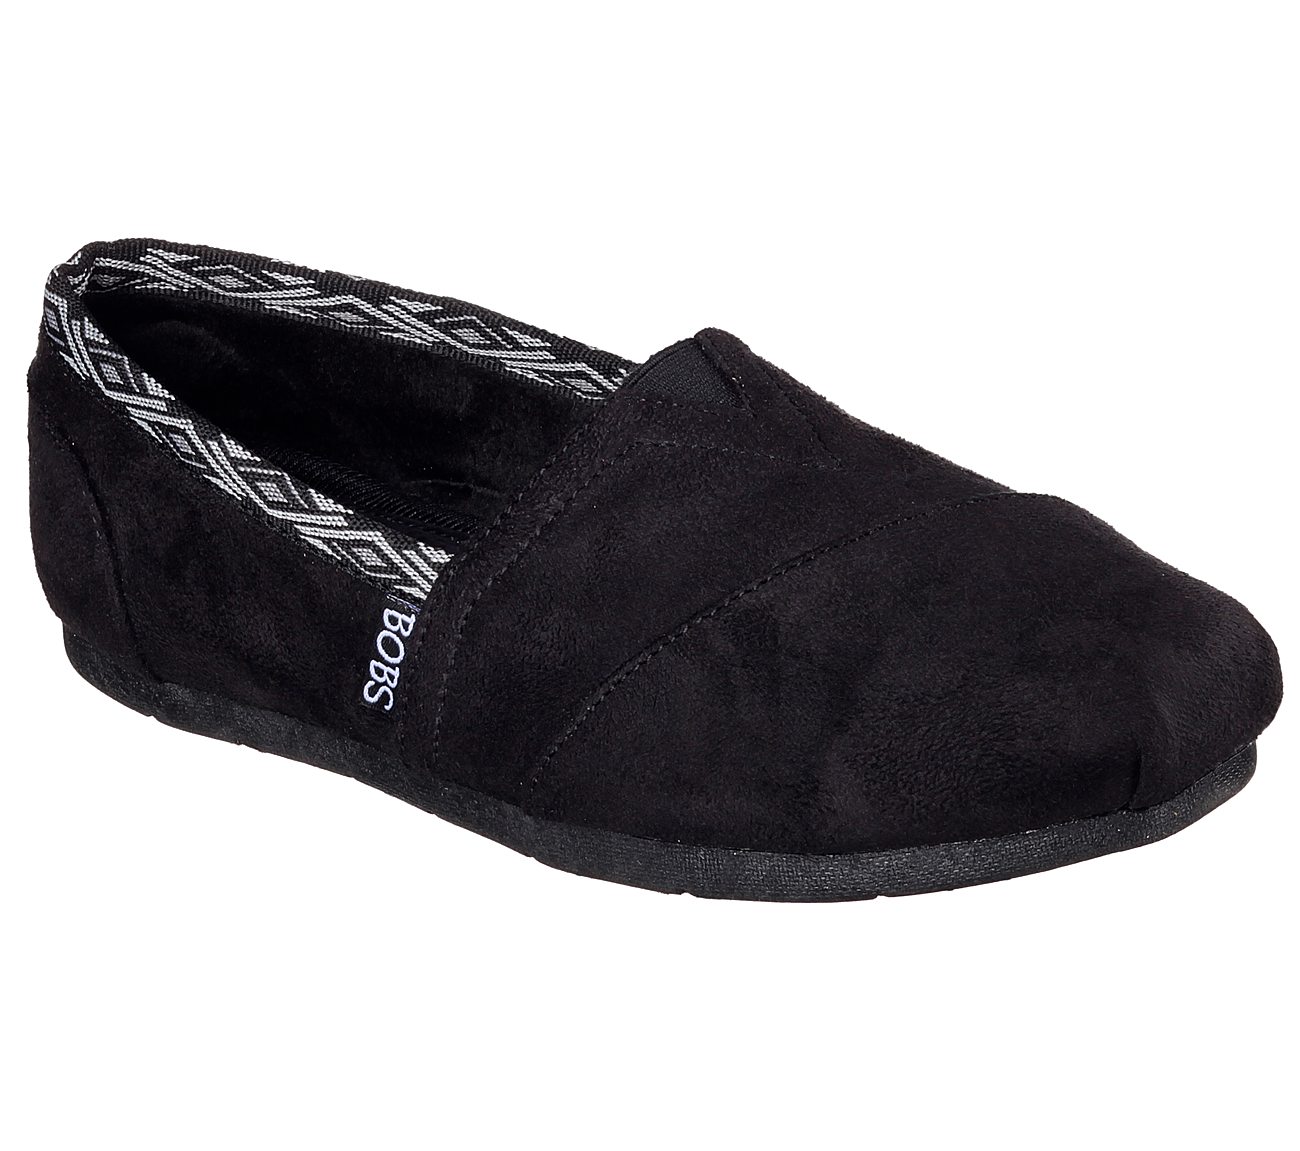 Buy SKECHERS Luxe Bobs - Sundial BOBS Shoes